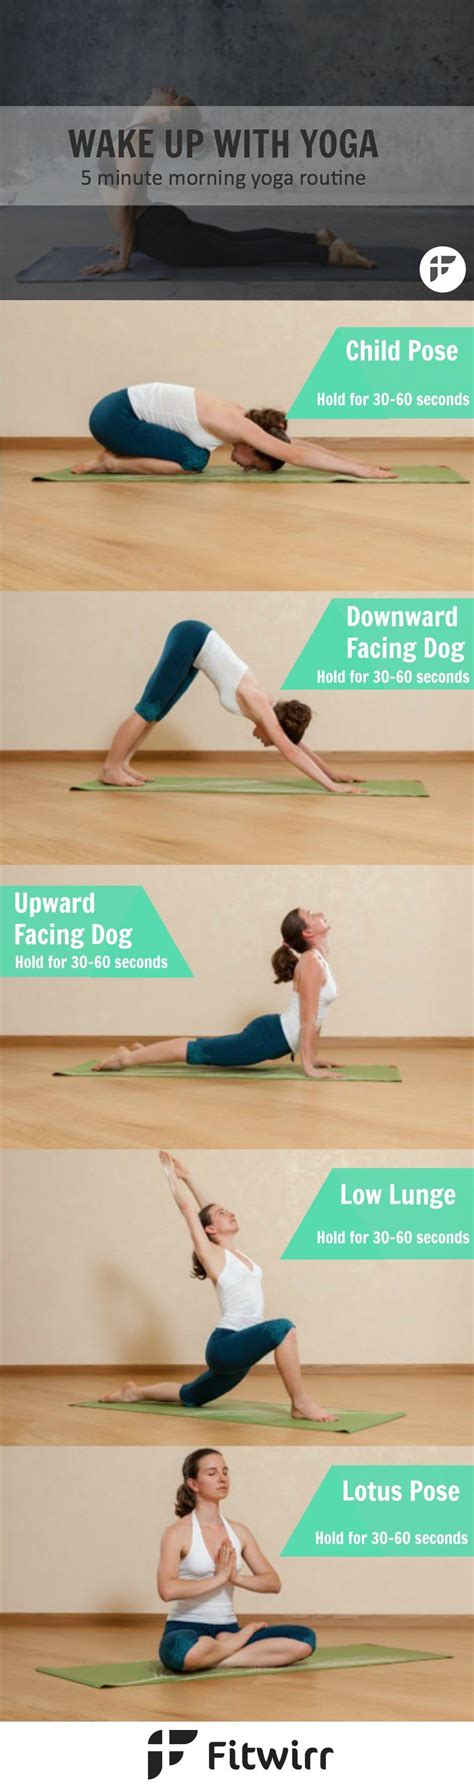 Wake Up With Yoga 5 Minute Morning Yoga Routine Pictures